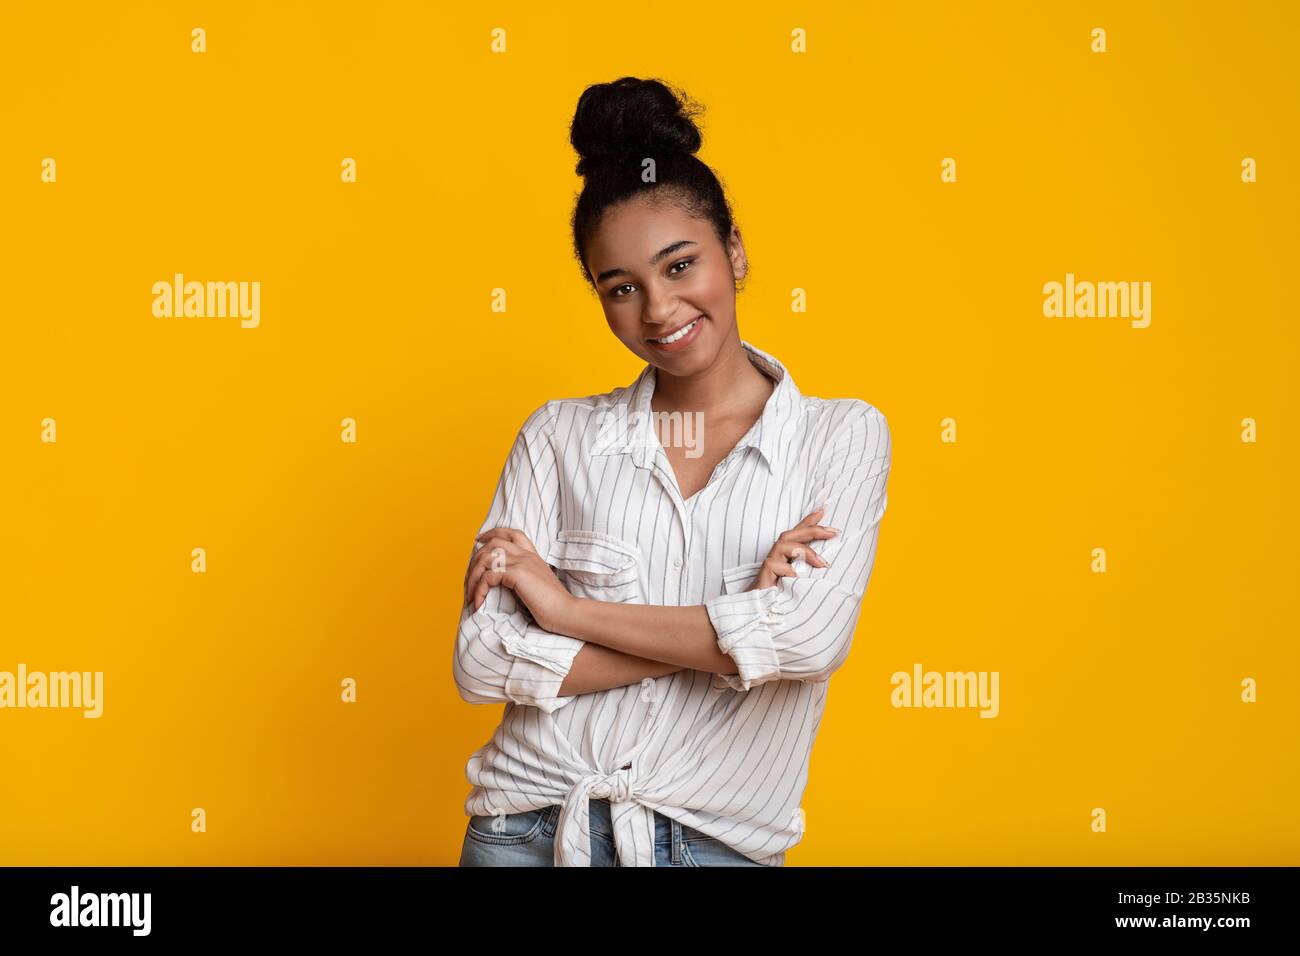 Beautiful Smiling Black Woman Posing With Folded Arms Over Yellow Background Stock Photo